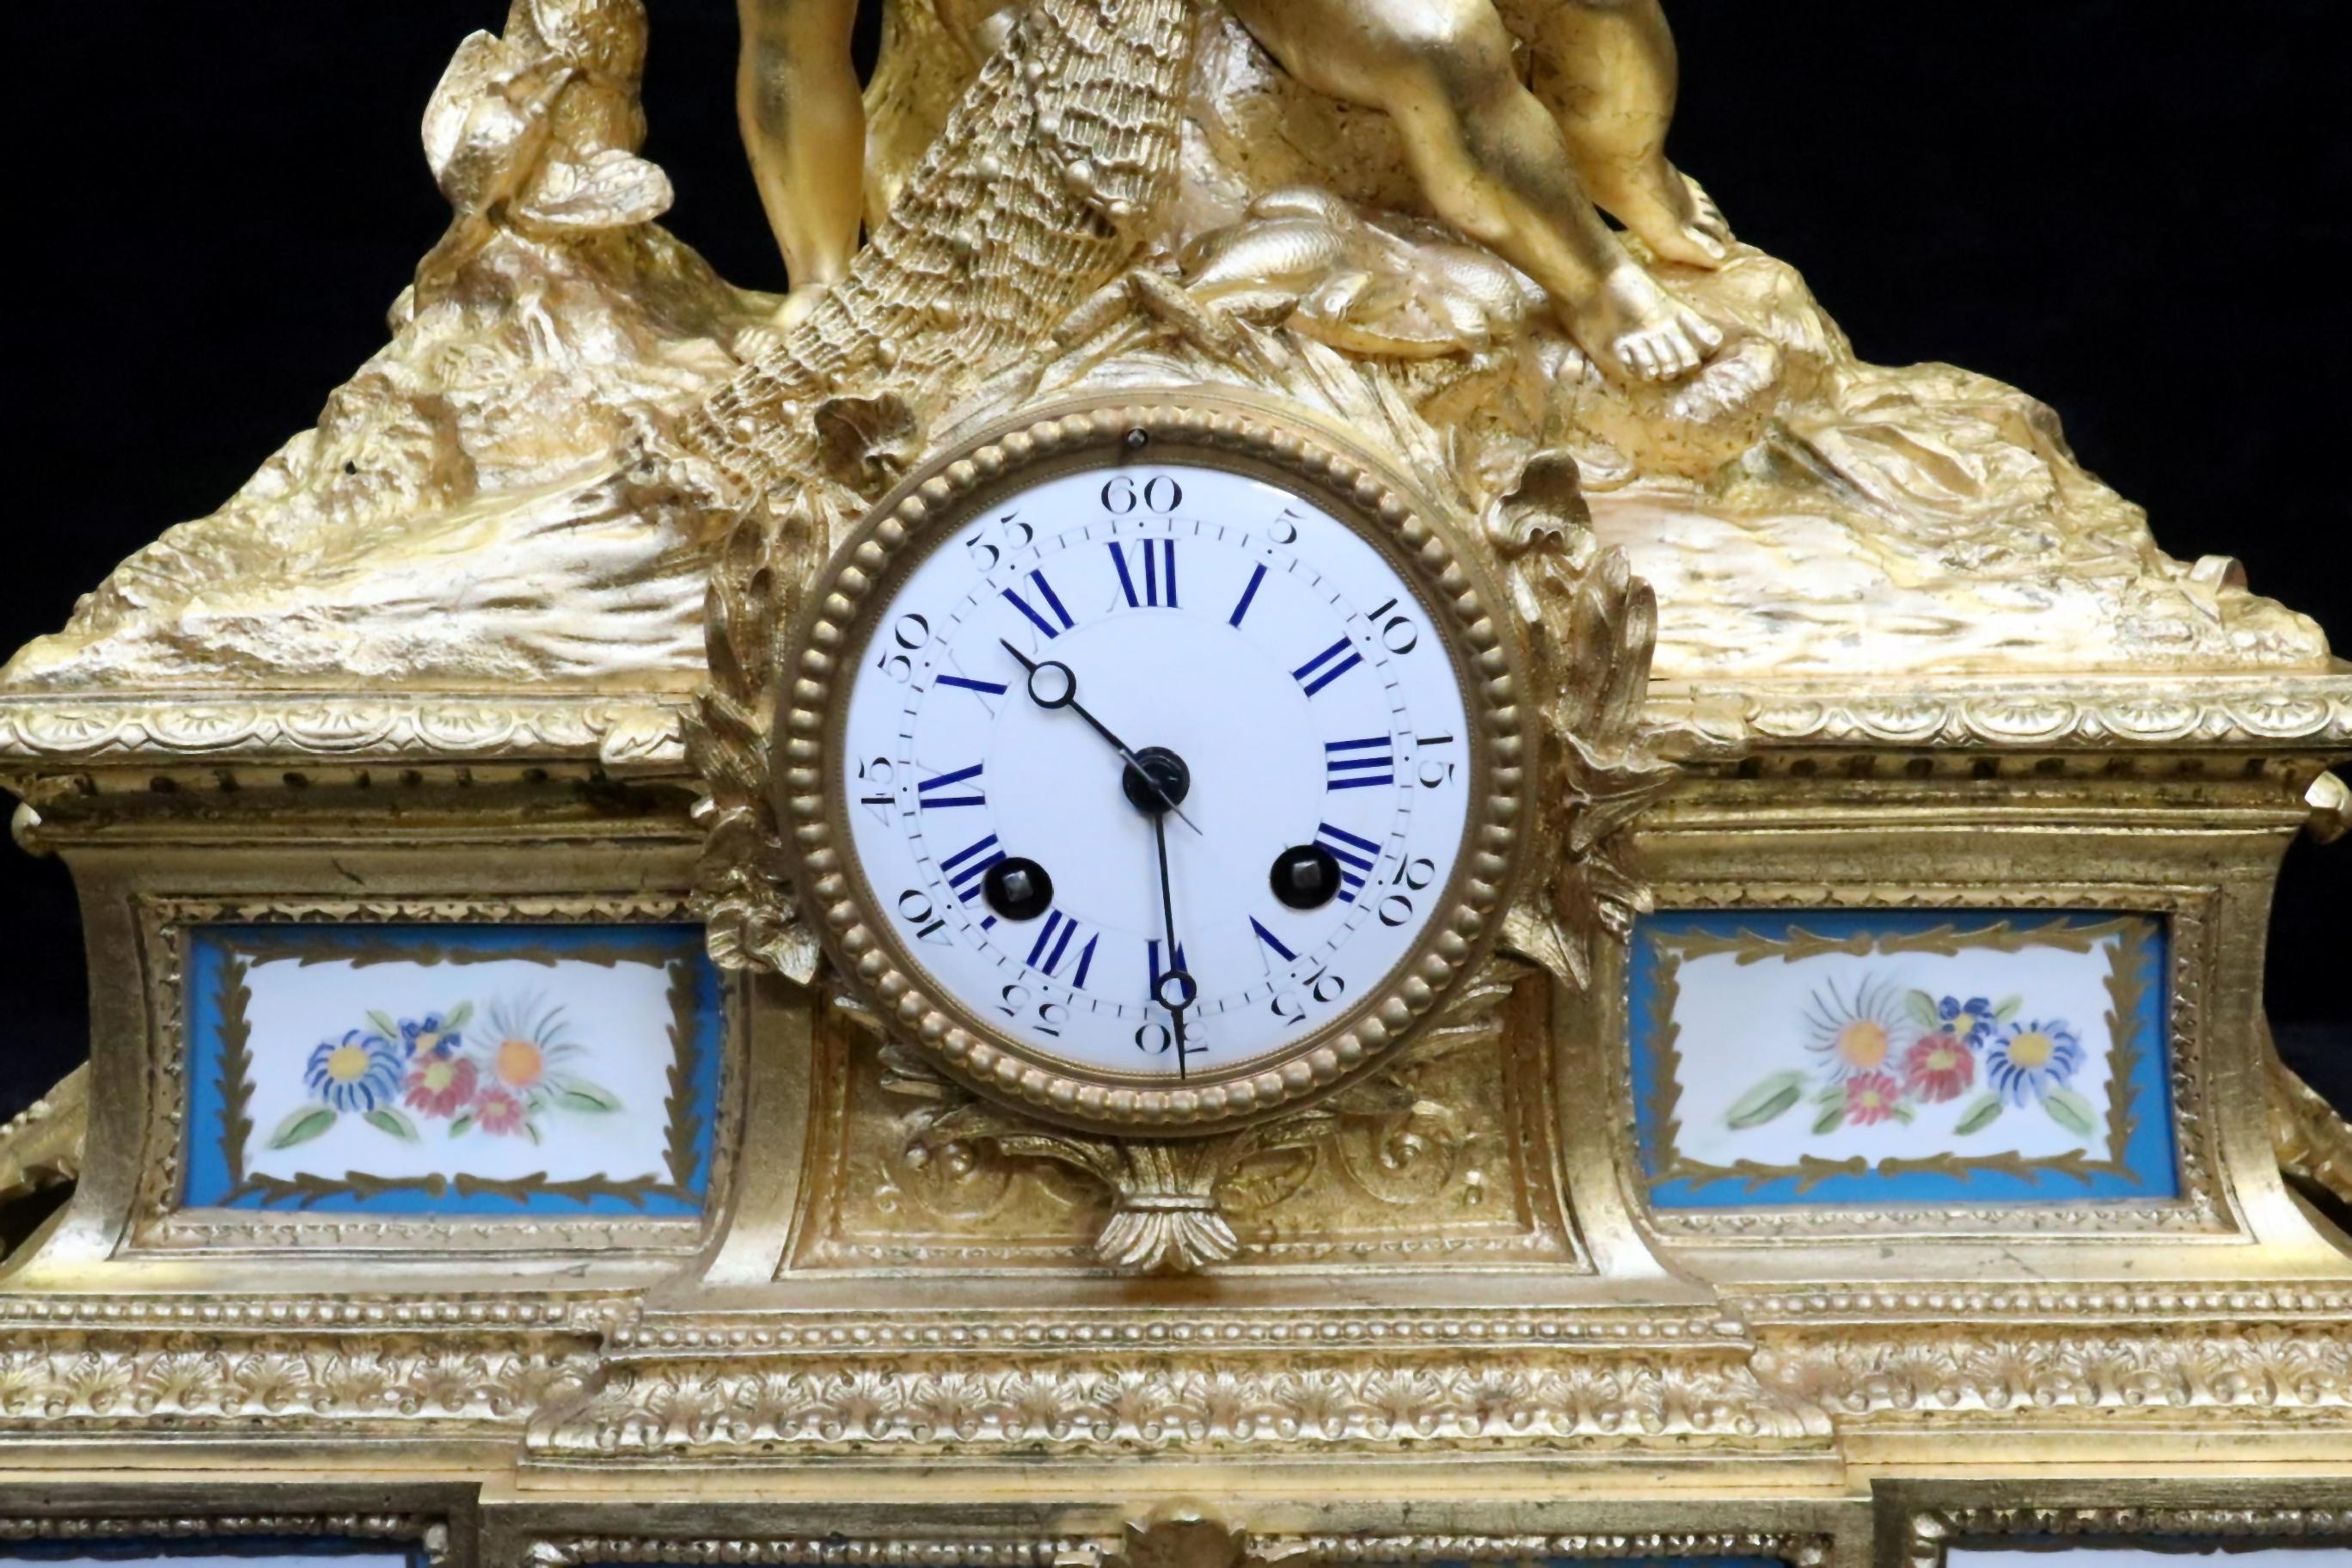 A very impressive French bronze gilt mantel clock with scrolling leaf, acanthus leaf and decorative moulding design throughout with inset serve style porcelain panels painted with flowers within a gilt and blue border. The clock is surmounted with